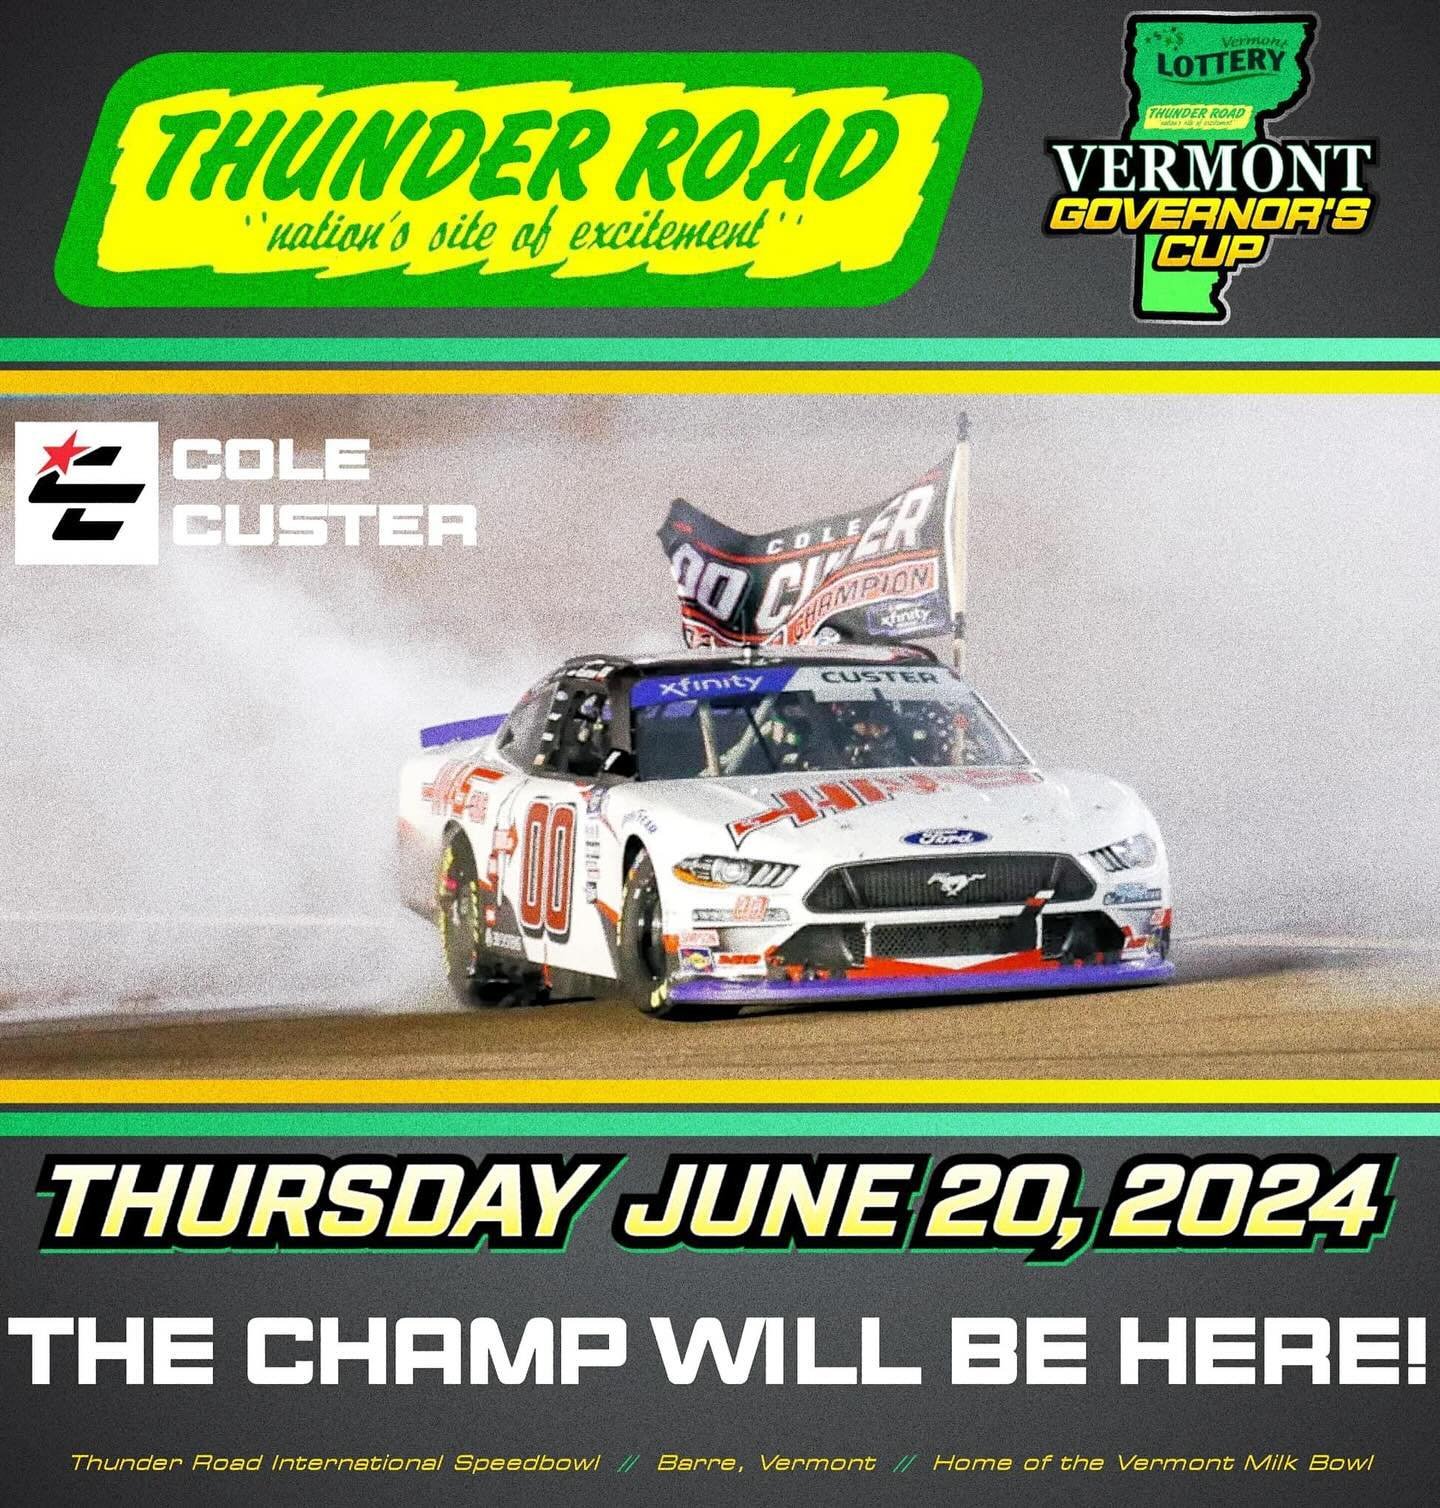 On Thursday June 20th, 2024 the reigning and defending NASCAR Xfinity Series champion @colecuster, joins the stars of the Maplefields/Irving Oil Late Model division for the 45th running of the Vermont Governor&rsquo;s Cup presented by the @vermontlot